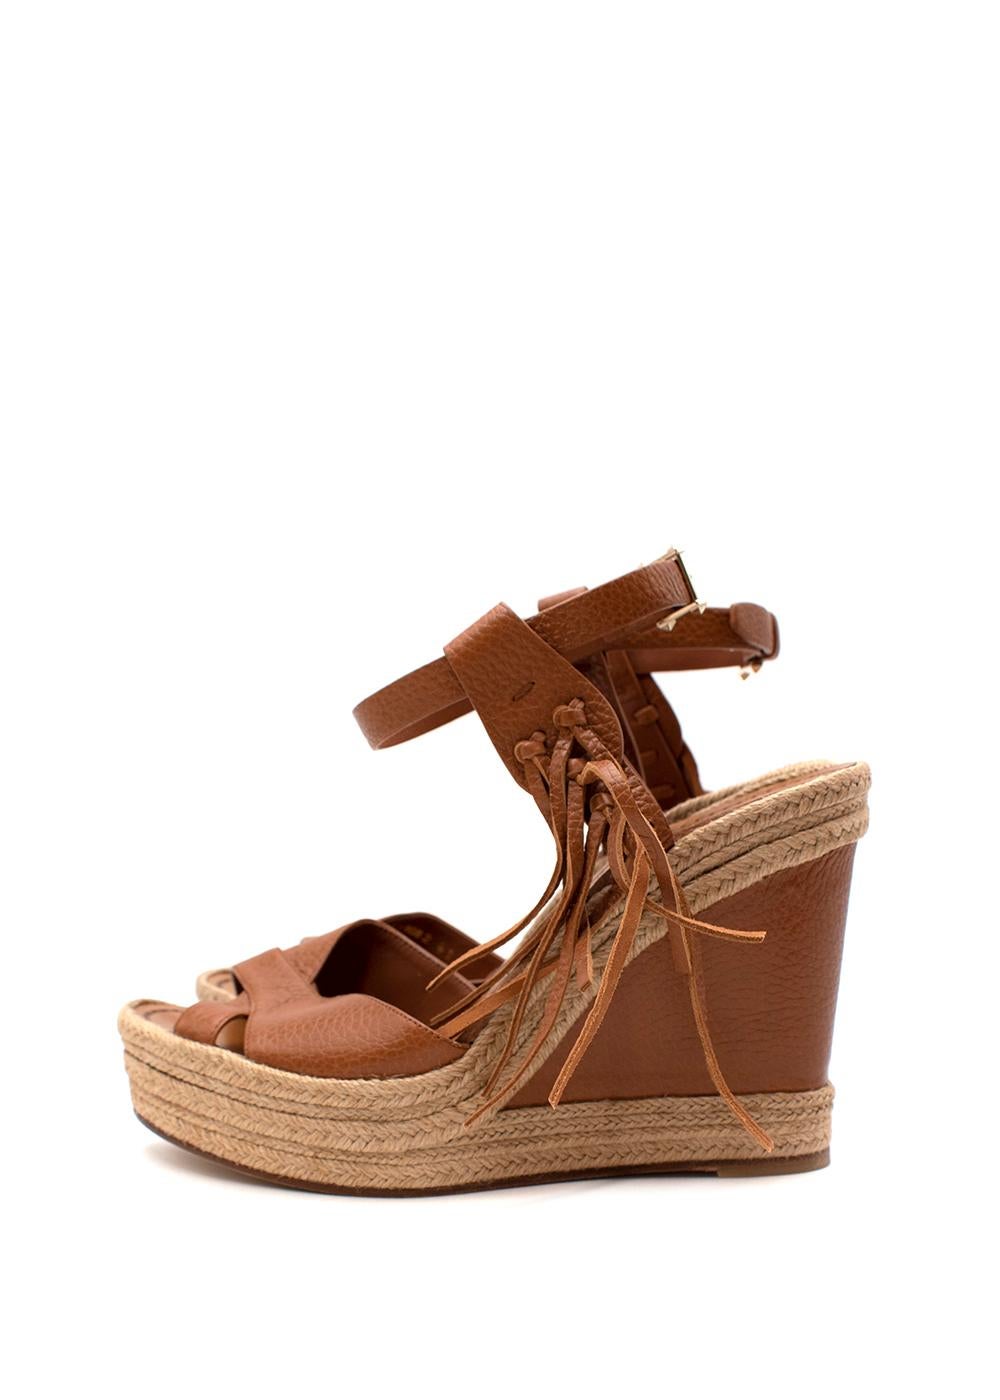 Women's or Men's Tan Leather & Jute Wedge Heeled Espadrille Sandals For Sale